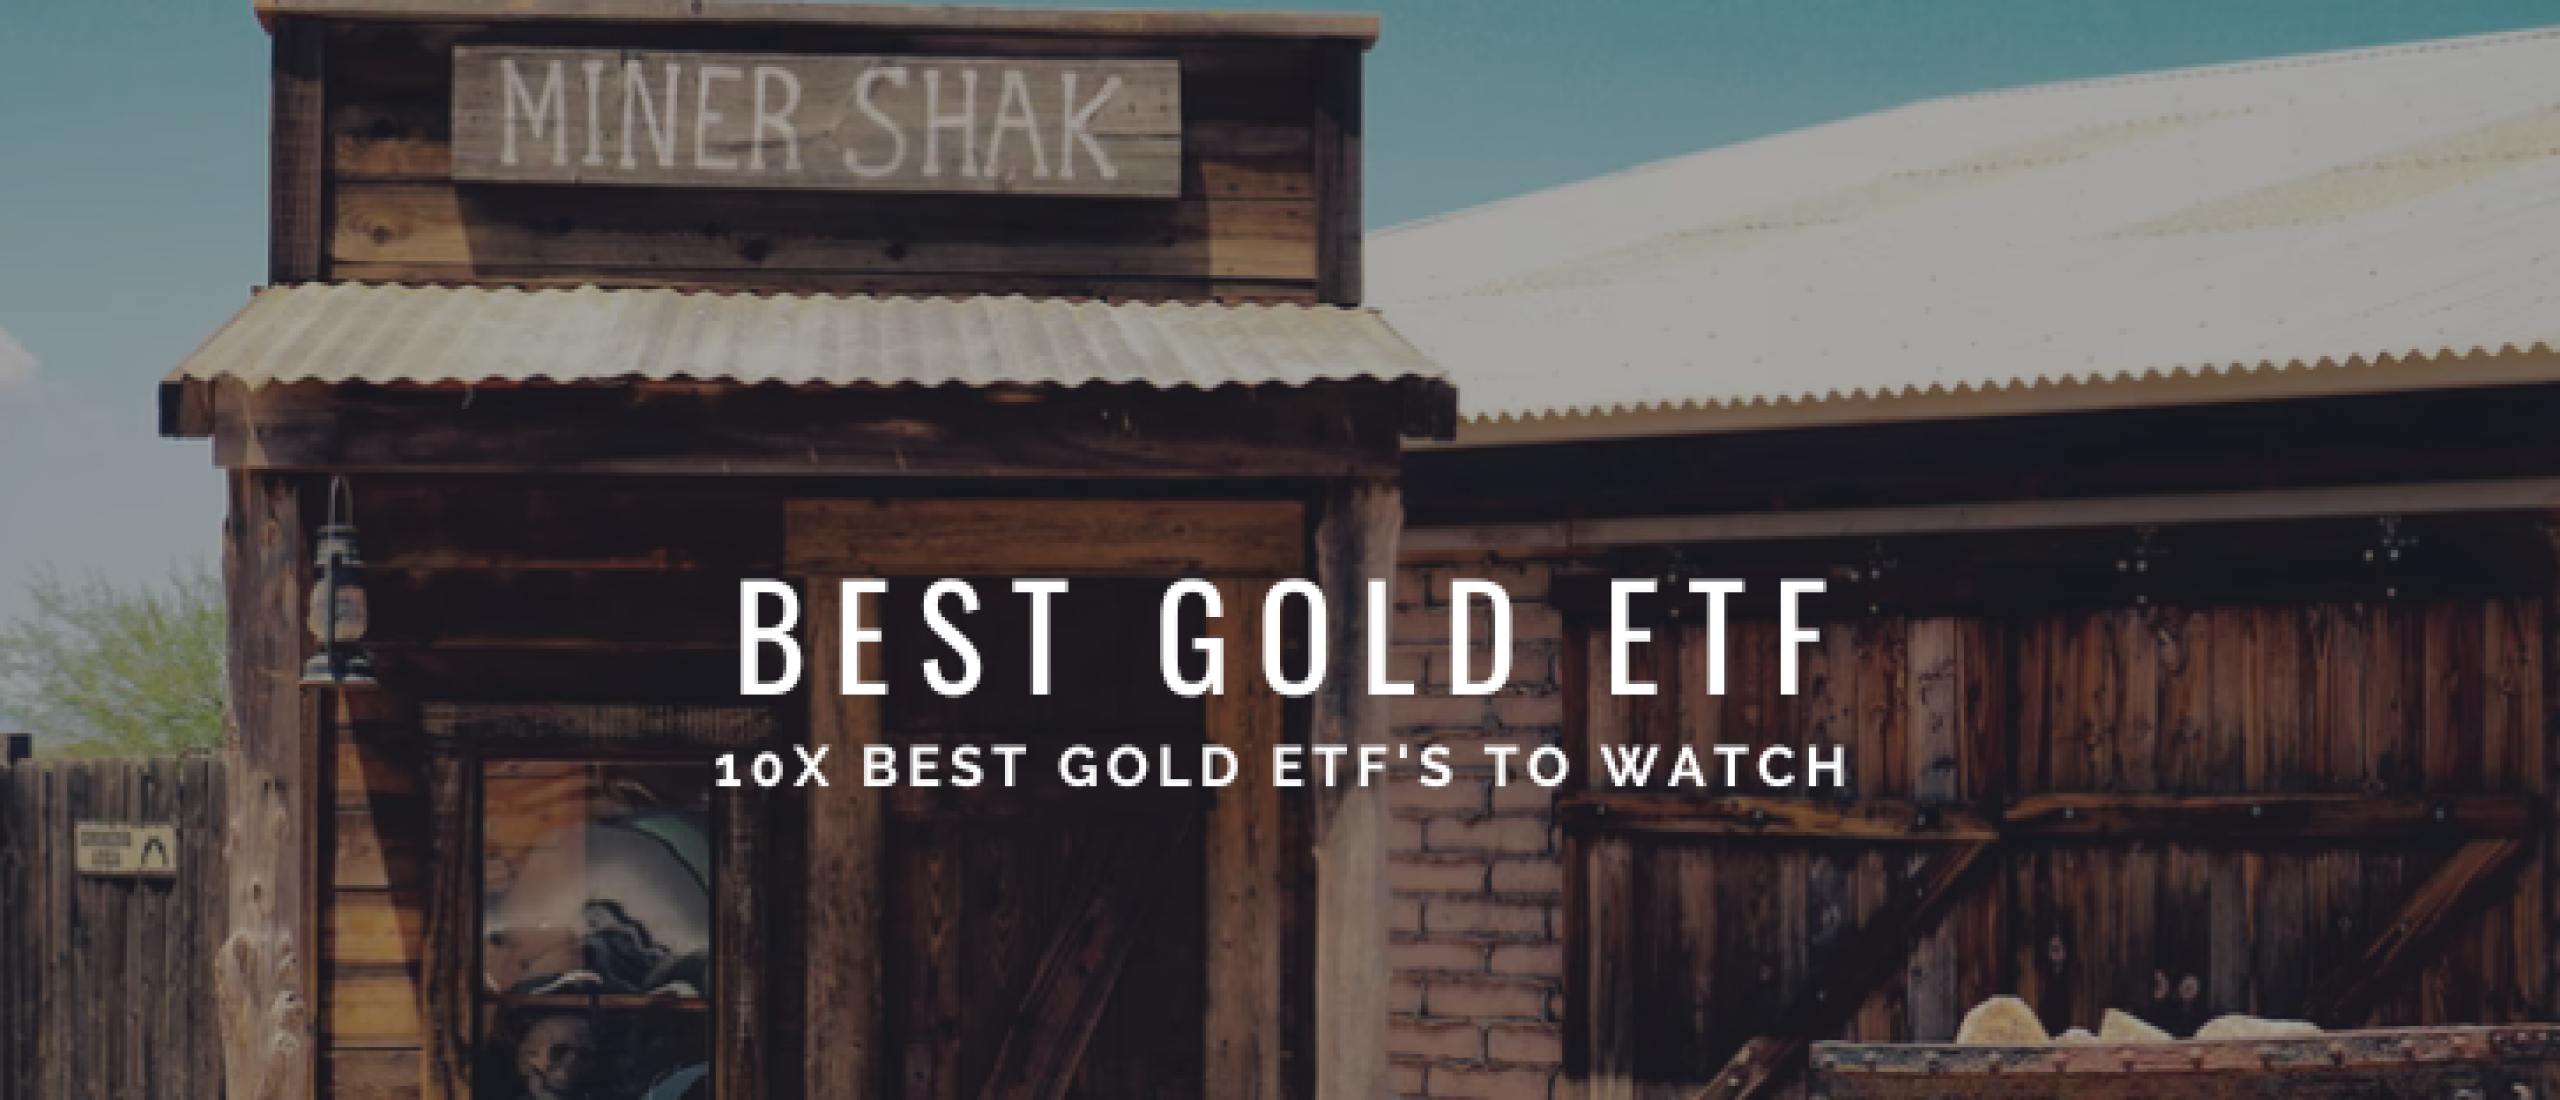 10x Best Gold ETF’s for Long-Term Investing | Happy Investors